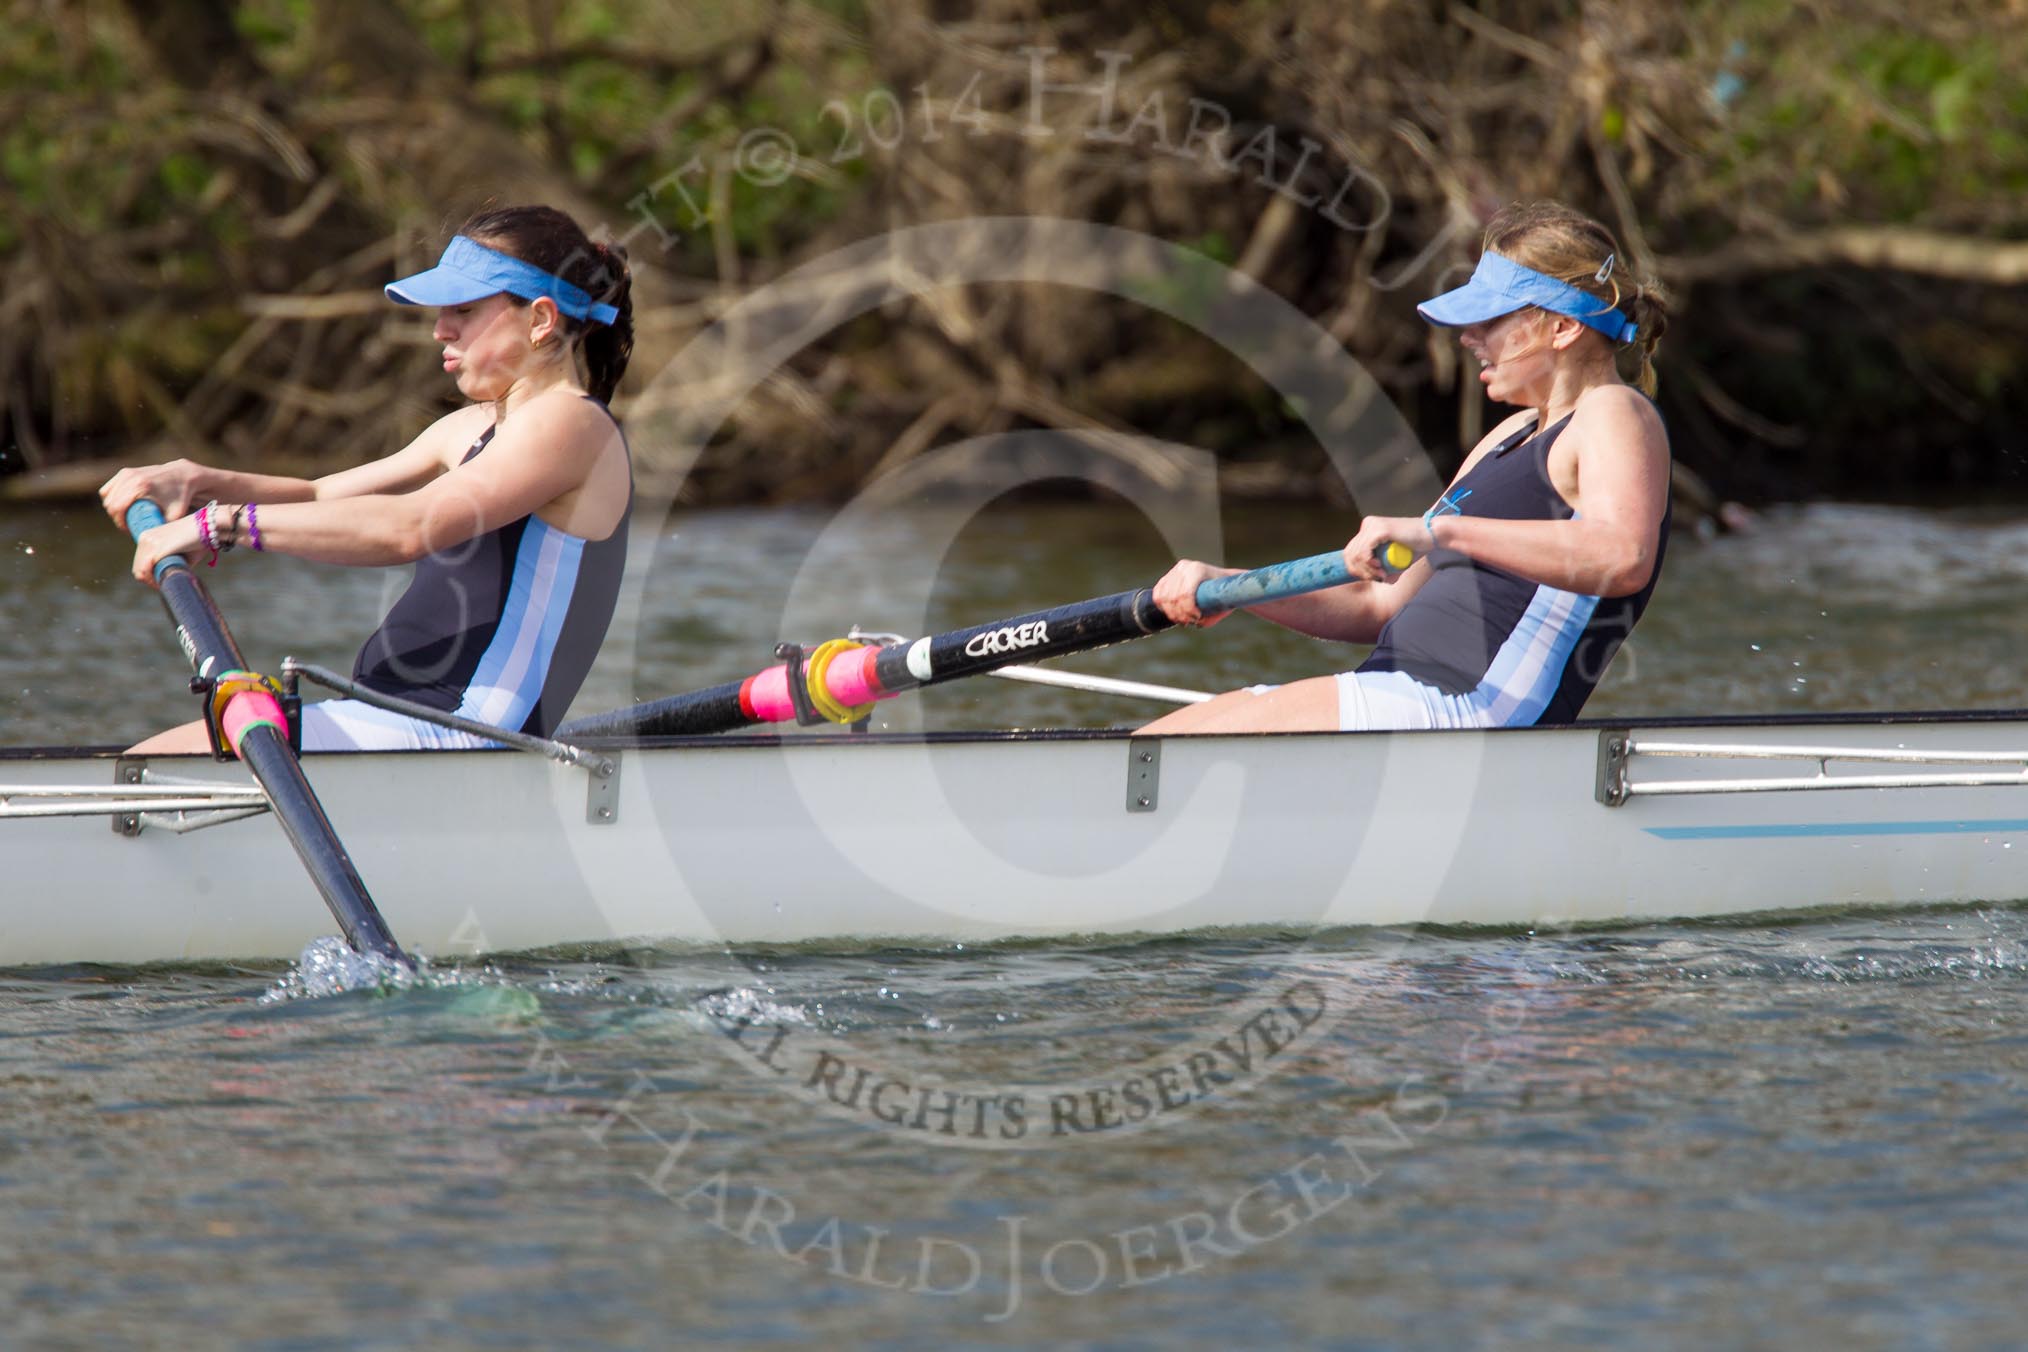 The Women's Boat Race and Henley Boat Races 2014: The Intercollegiate women's race. The Wadham College (Oxford) boat, 3 seat Lia Orlando, 2 Anne Binderup..
River Thames,
Henley-on-Thames,
Buckinghamshire,
United Kingdom,
on 30 March 2014 at 13:27, image #17